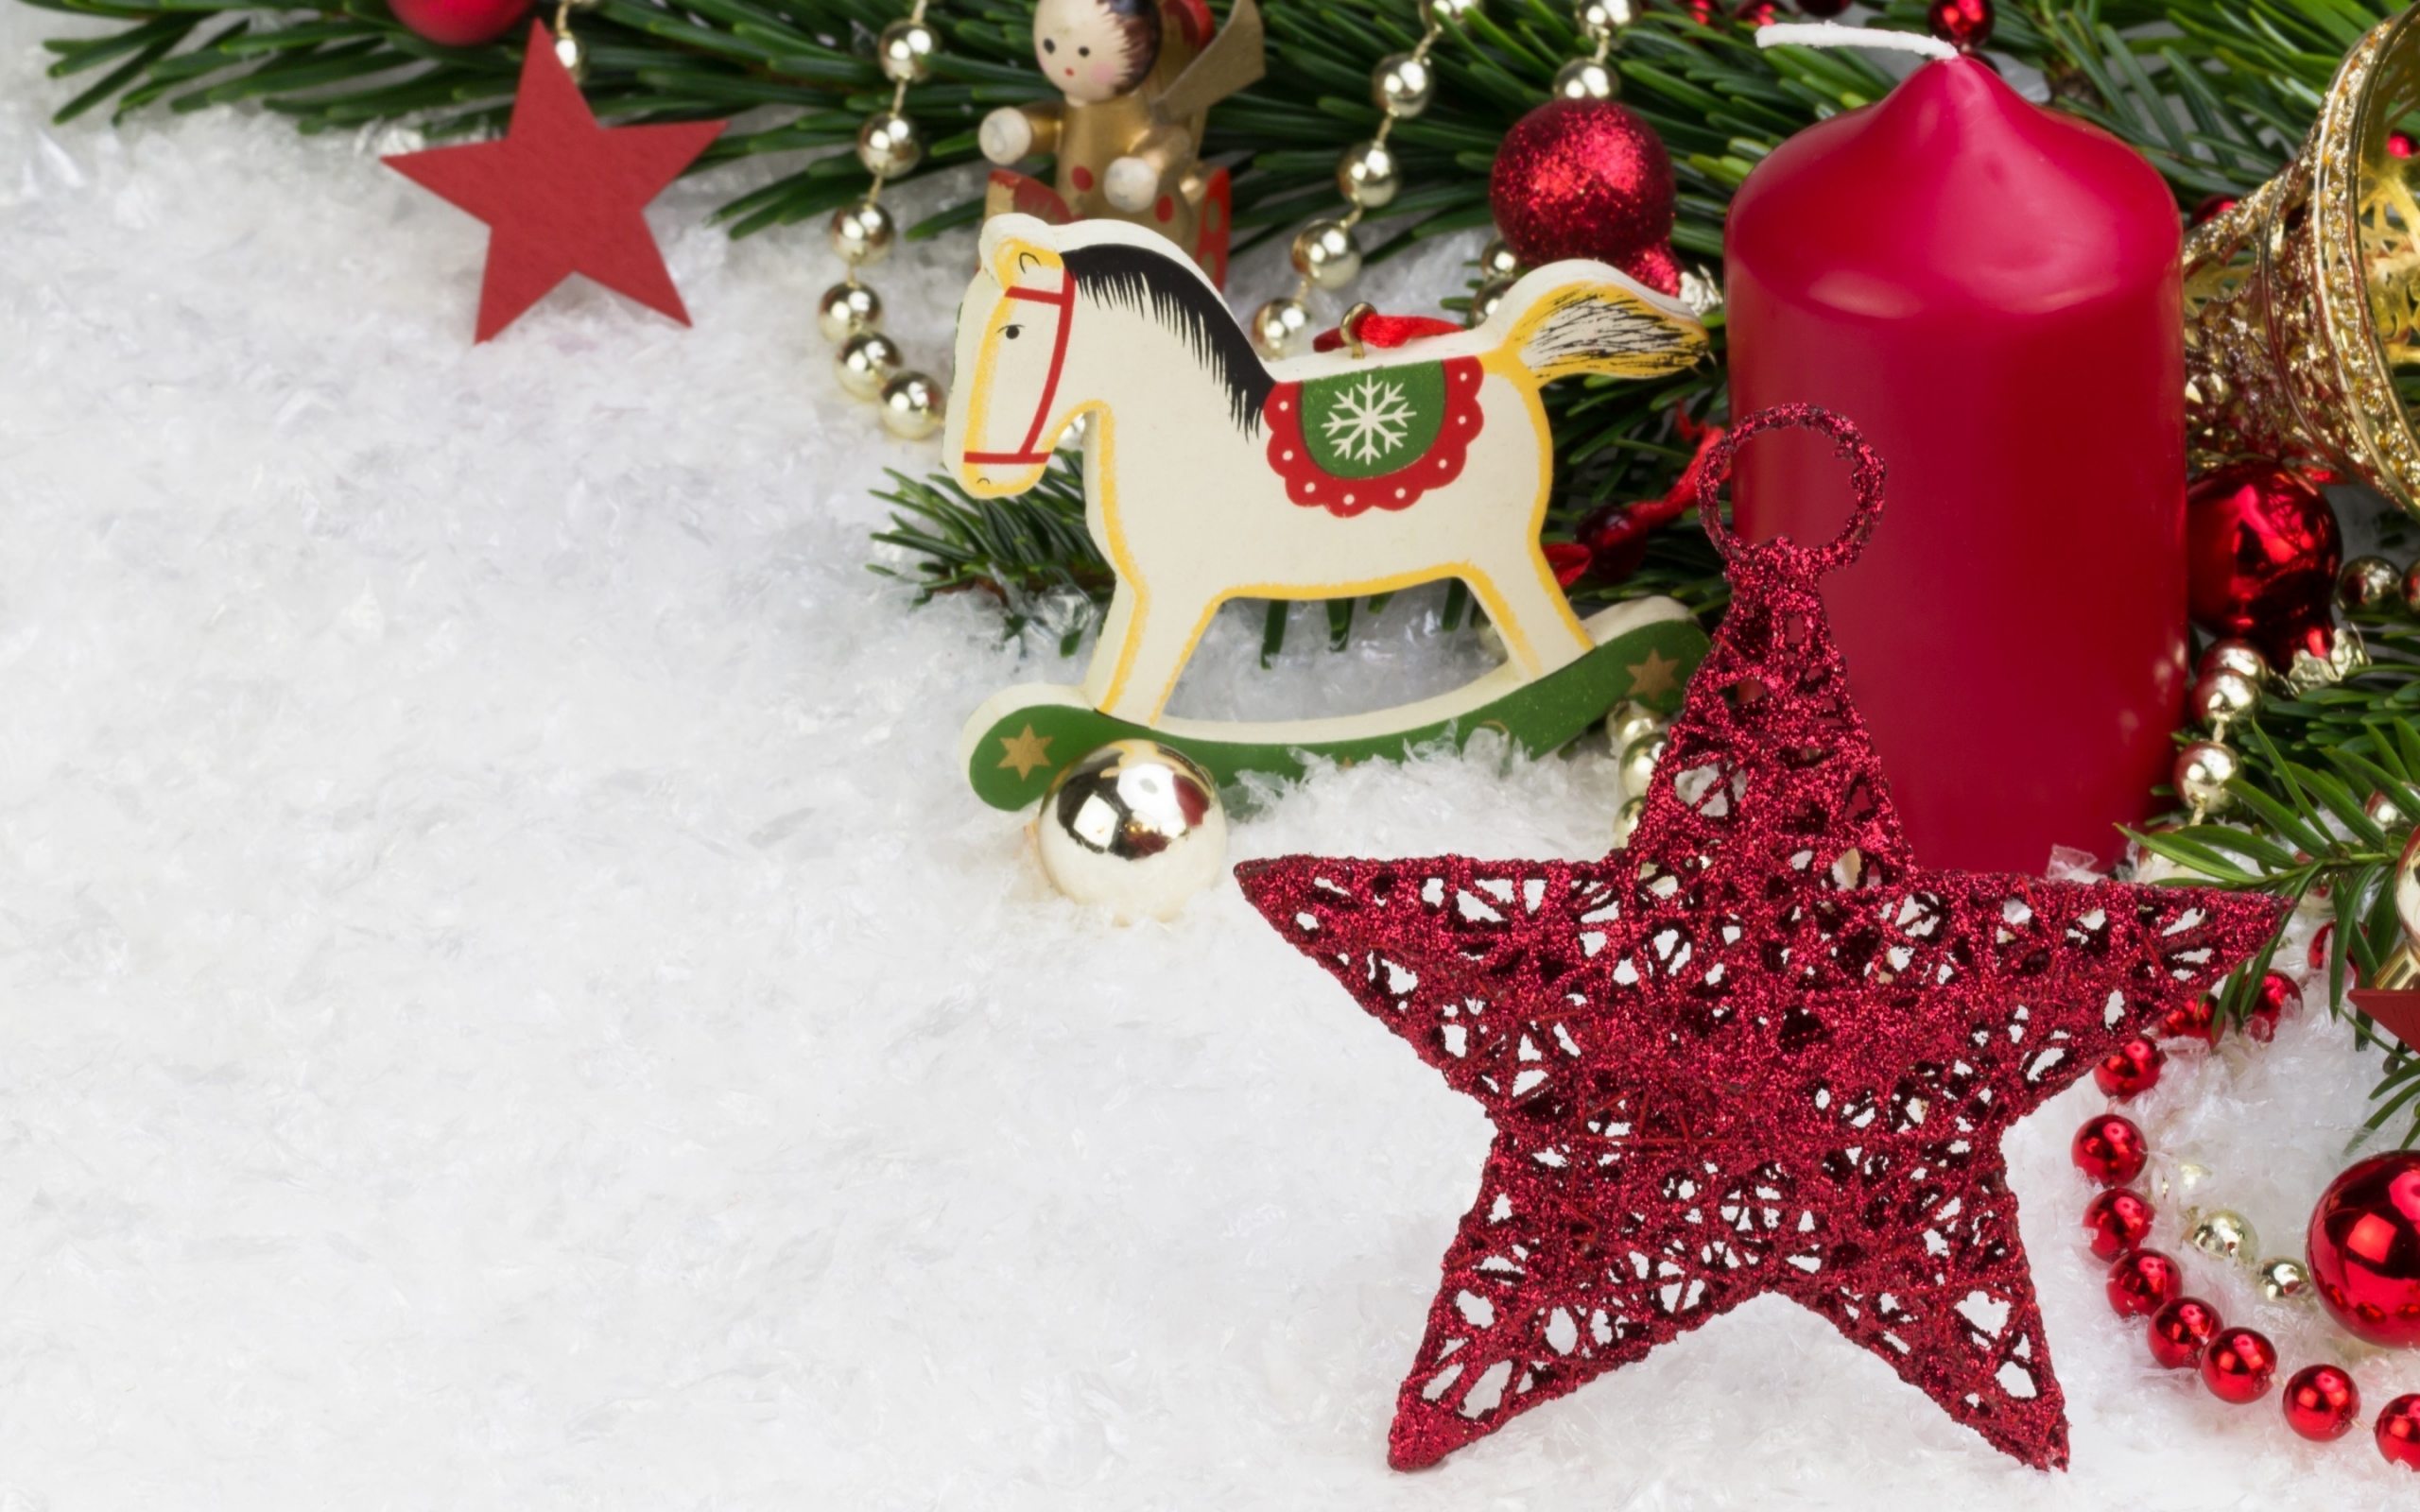 2014 Small Christmas Ornaments for 2560 x 1600 widescreen resolution